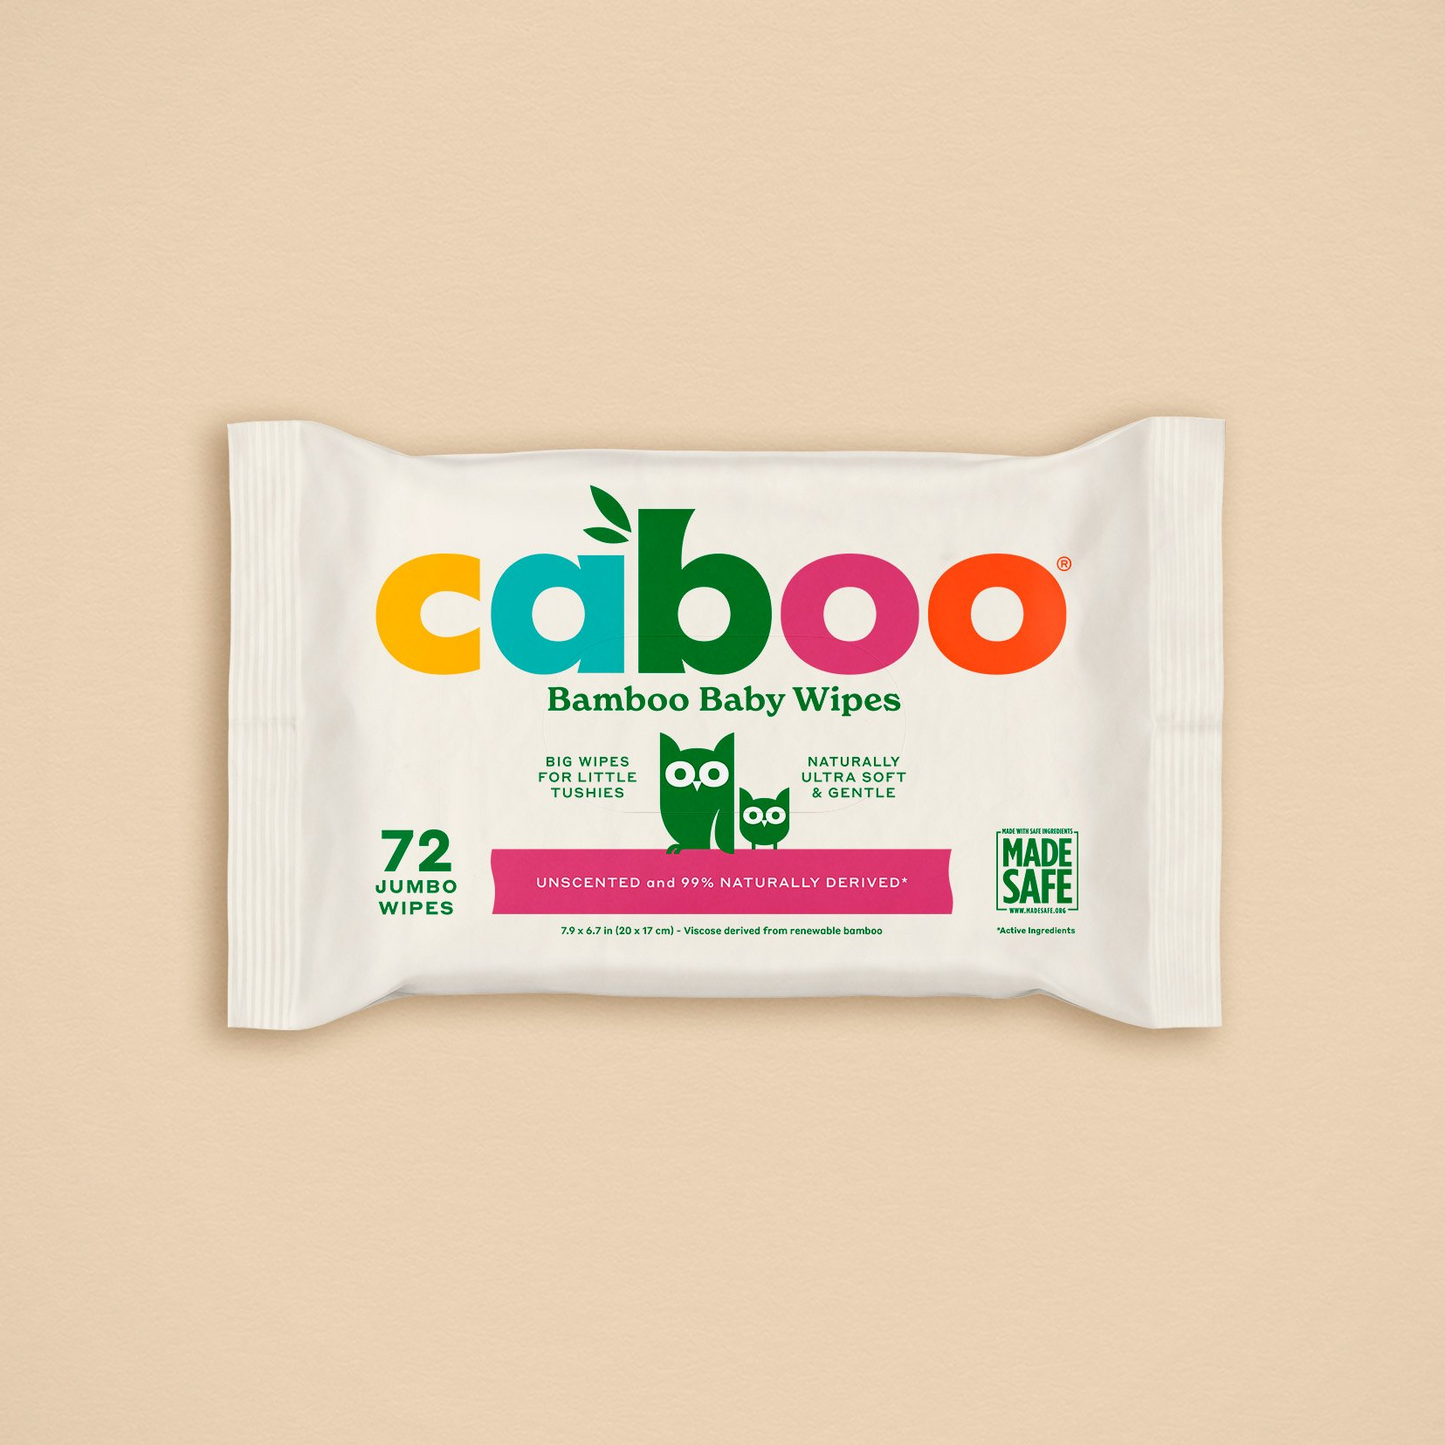 Caboo Bamboo Baby Wipes MADE SAFE